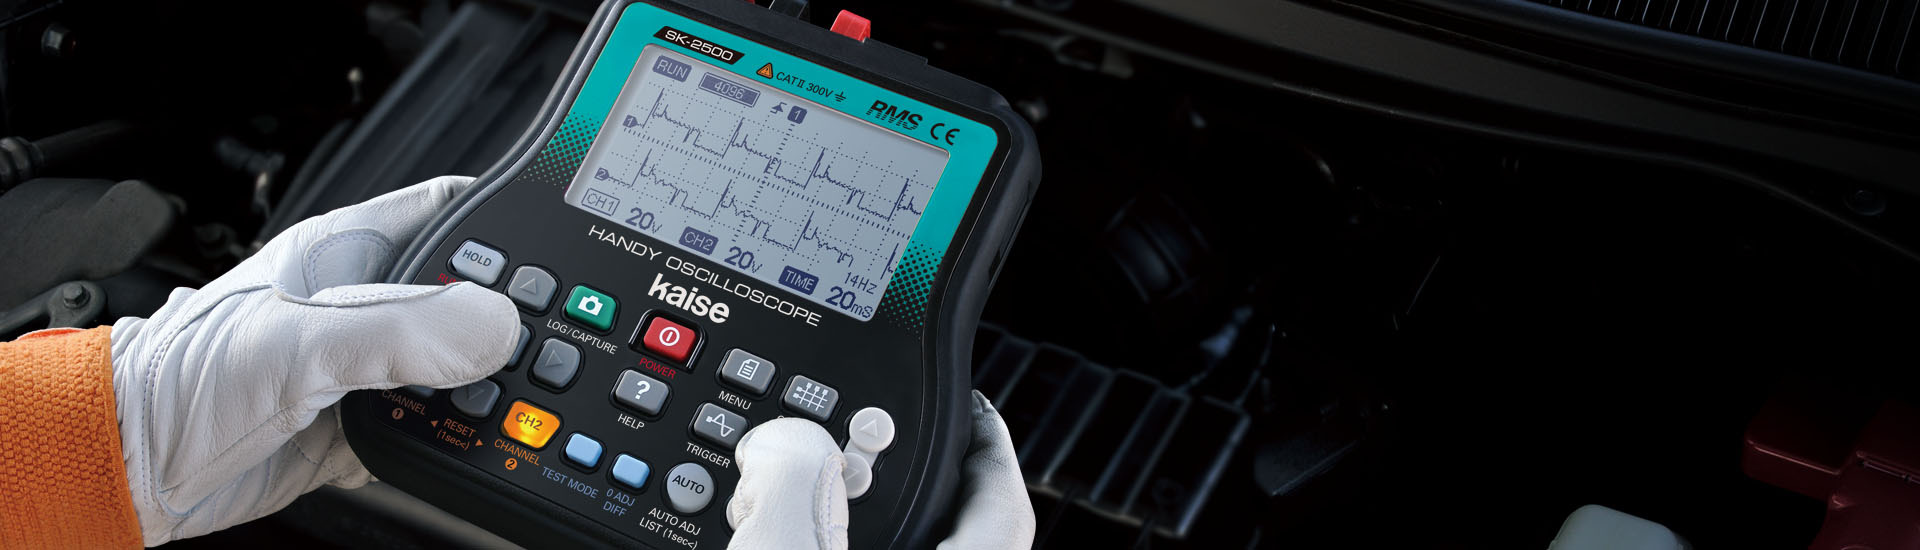 SK-2500 Oscilloscope for Automotive/Motorcycle